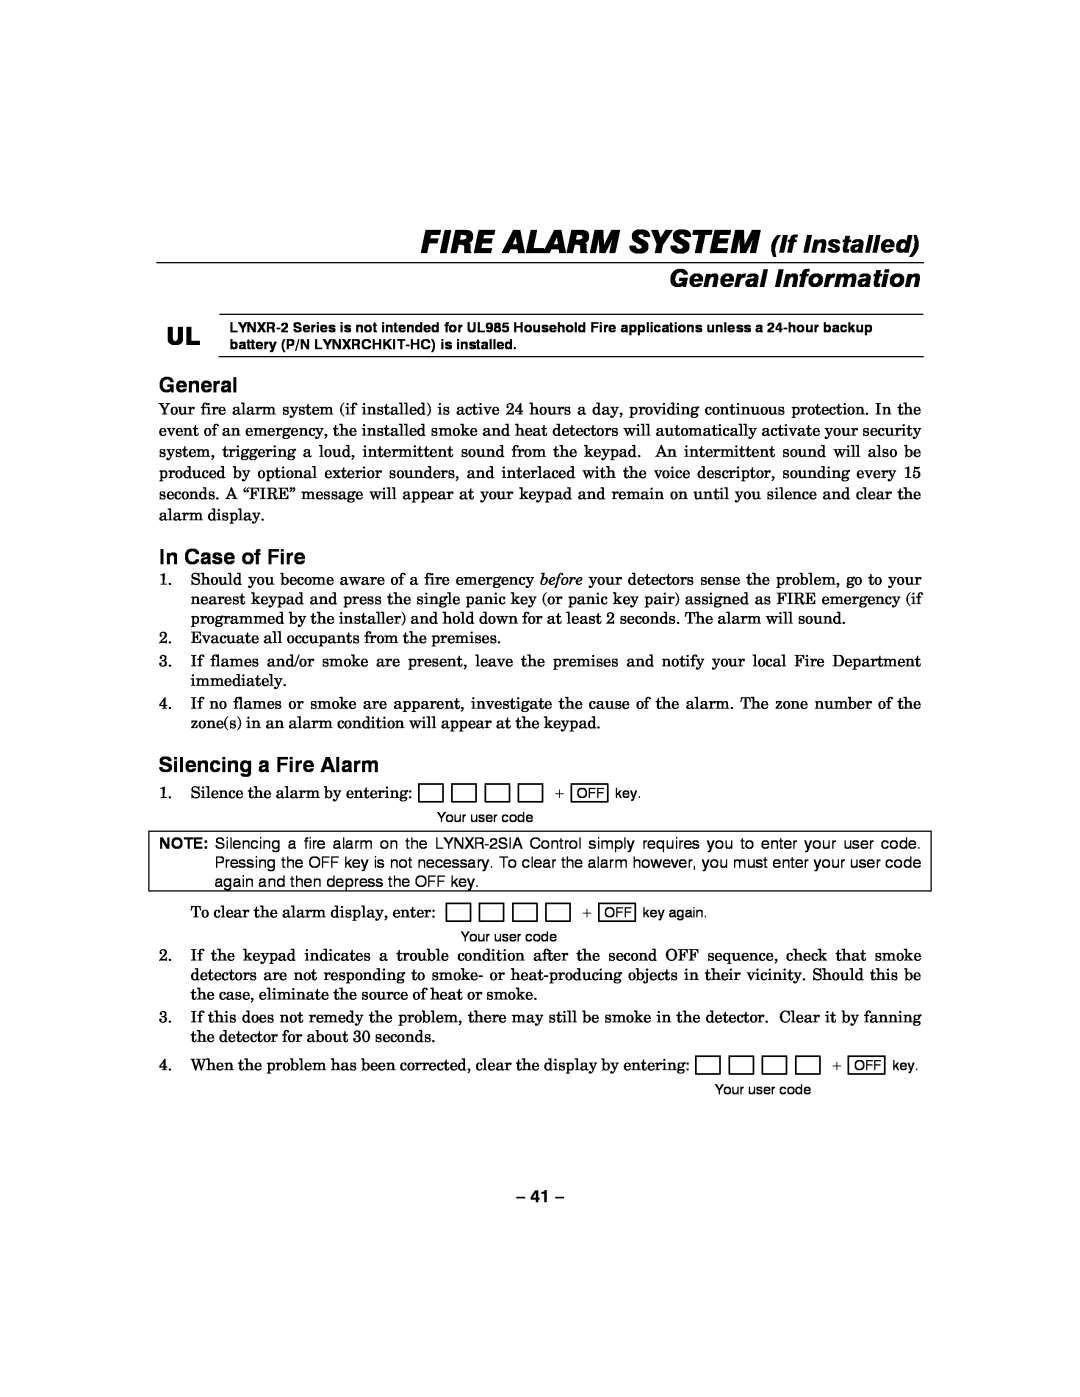 Honeywell LYNXR-2 manual FIRE ALARM SYSTEM If Installed, General Information, In Case of Fire, Silencing a Fire Alarm 